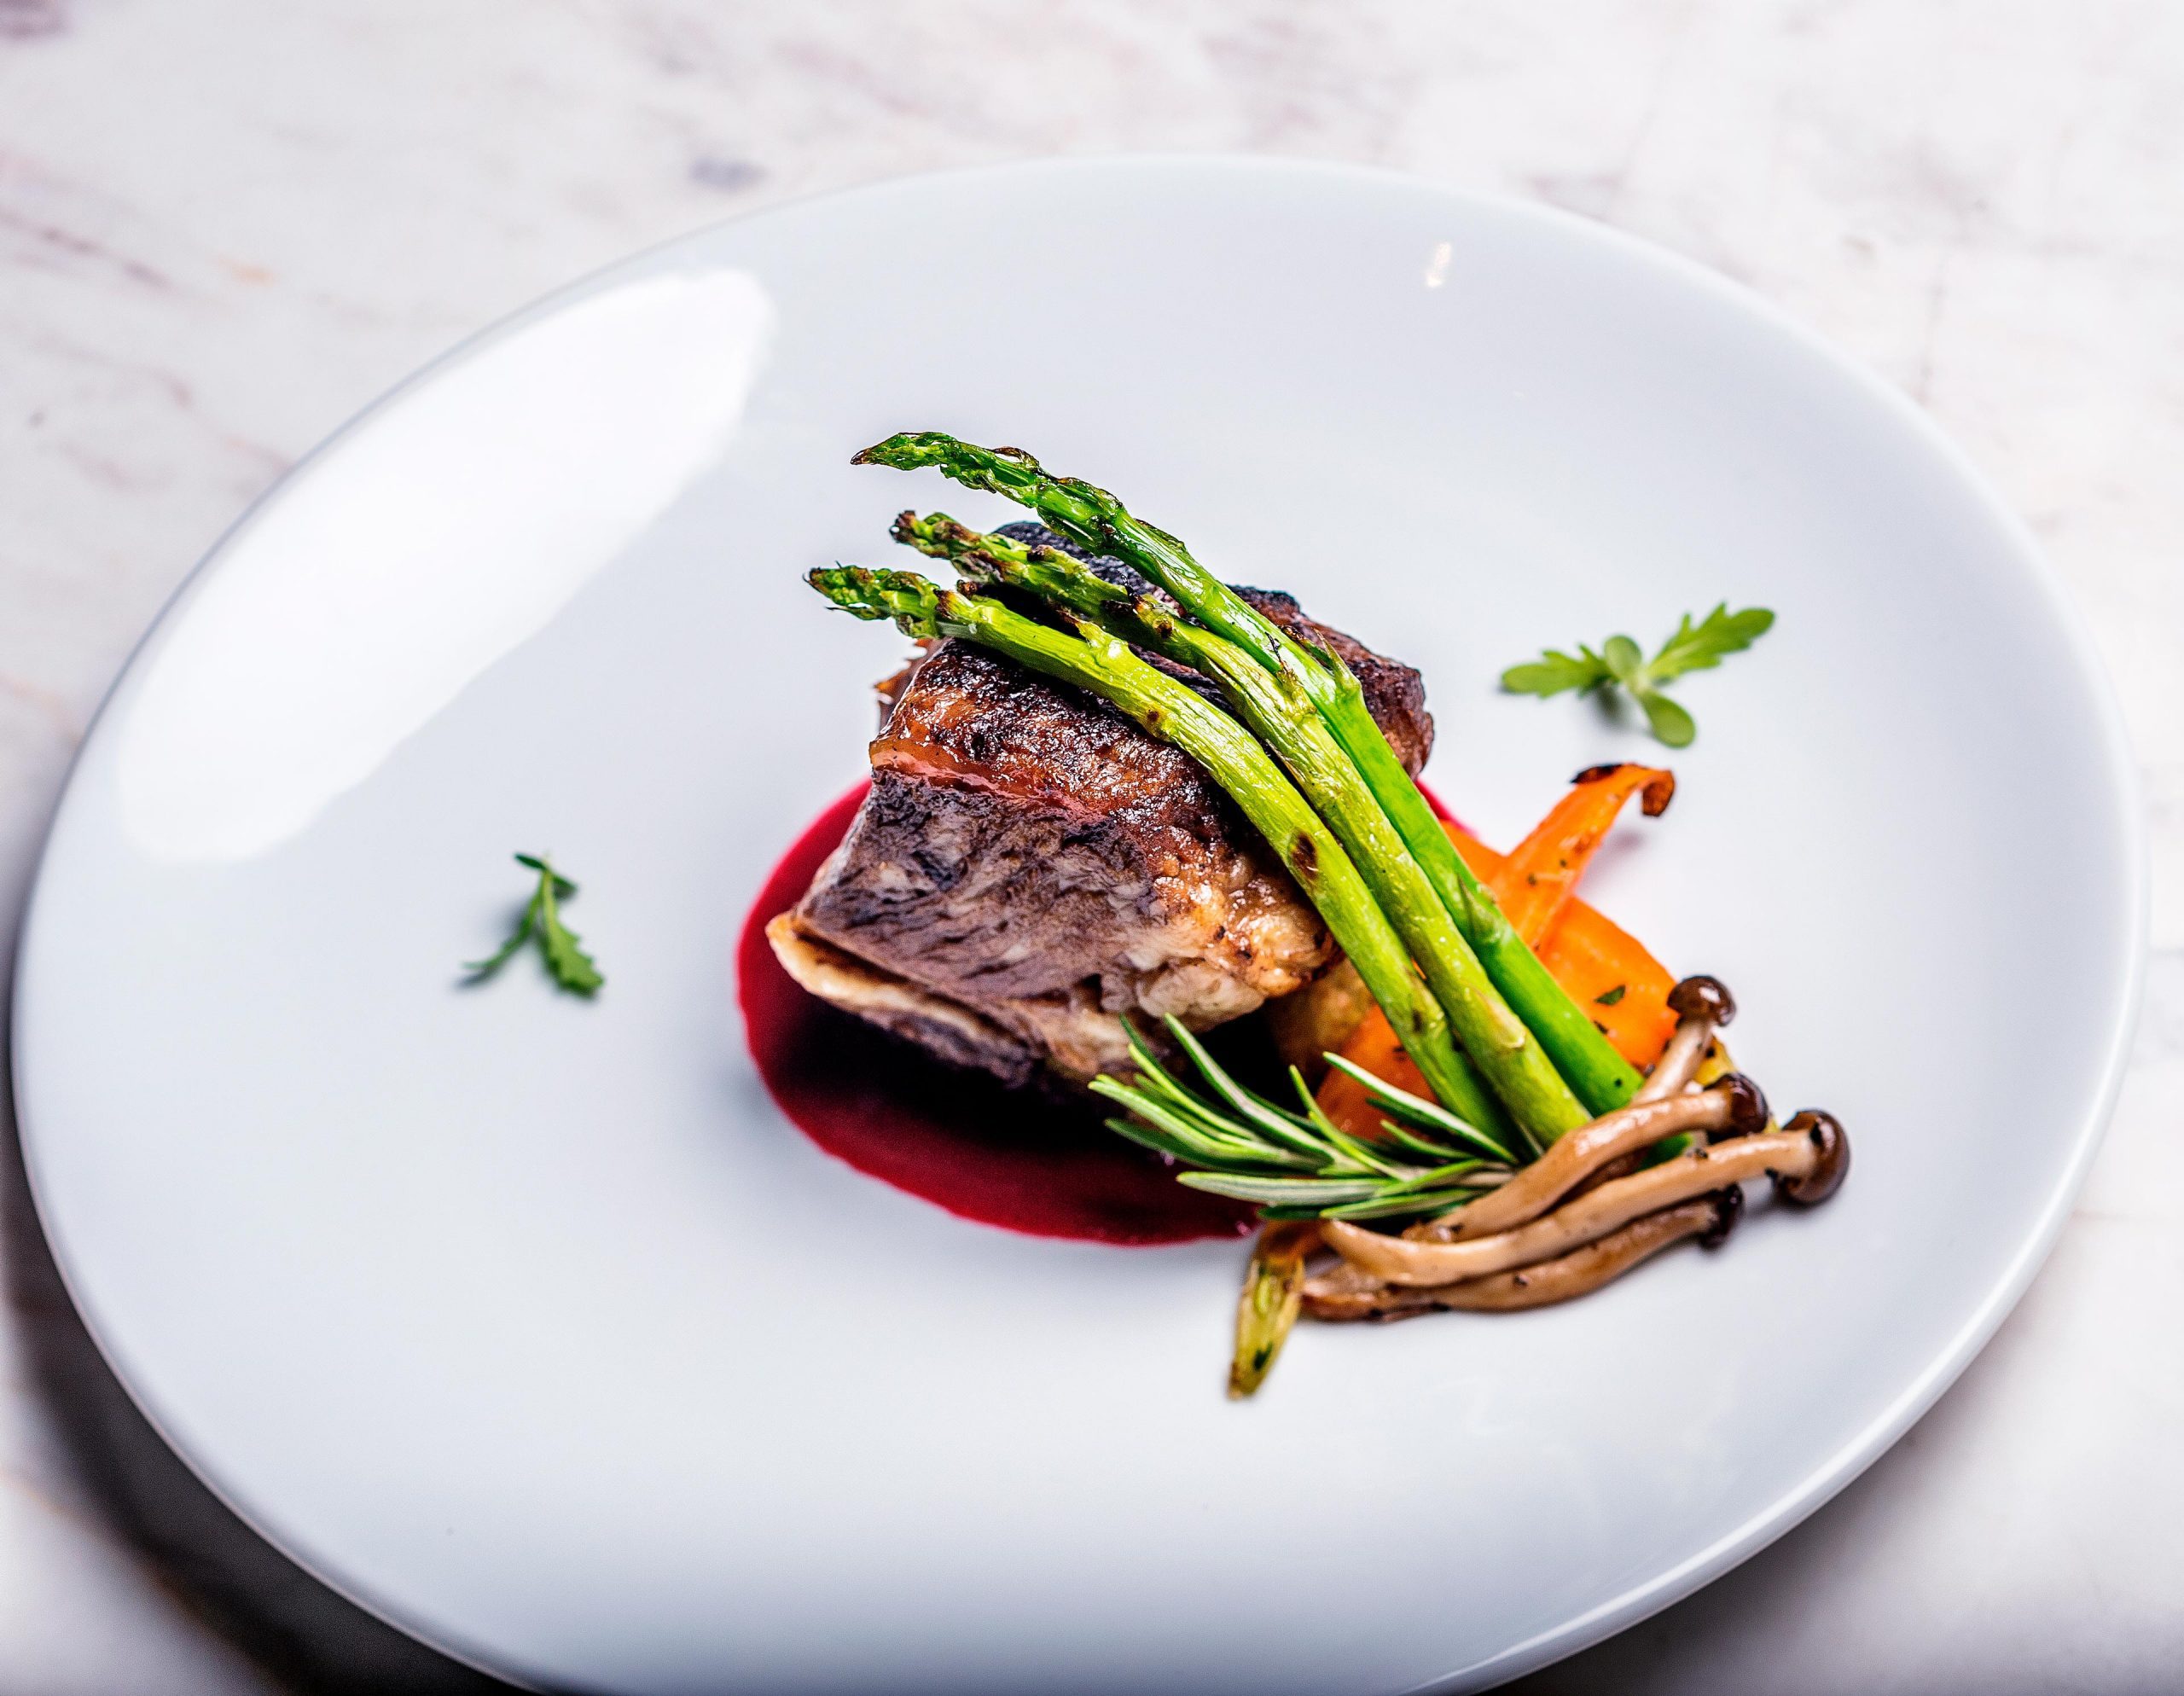 A meticulously polished food shot captures the essence of culinary excellence. The image showcases a beautifully plated dish featuring steak, asparagus, carrot, and mushrooms, set on a white plate atop a pristine white marble table. Expertly lit and crisply detailed, this food photography shot embodies the sophistication of high-end dining.